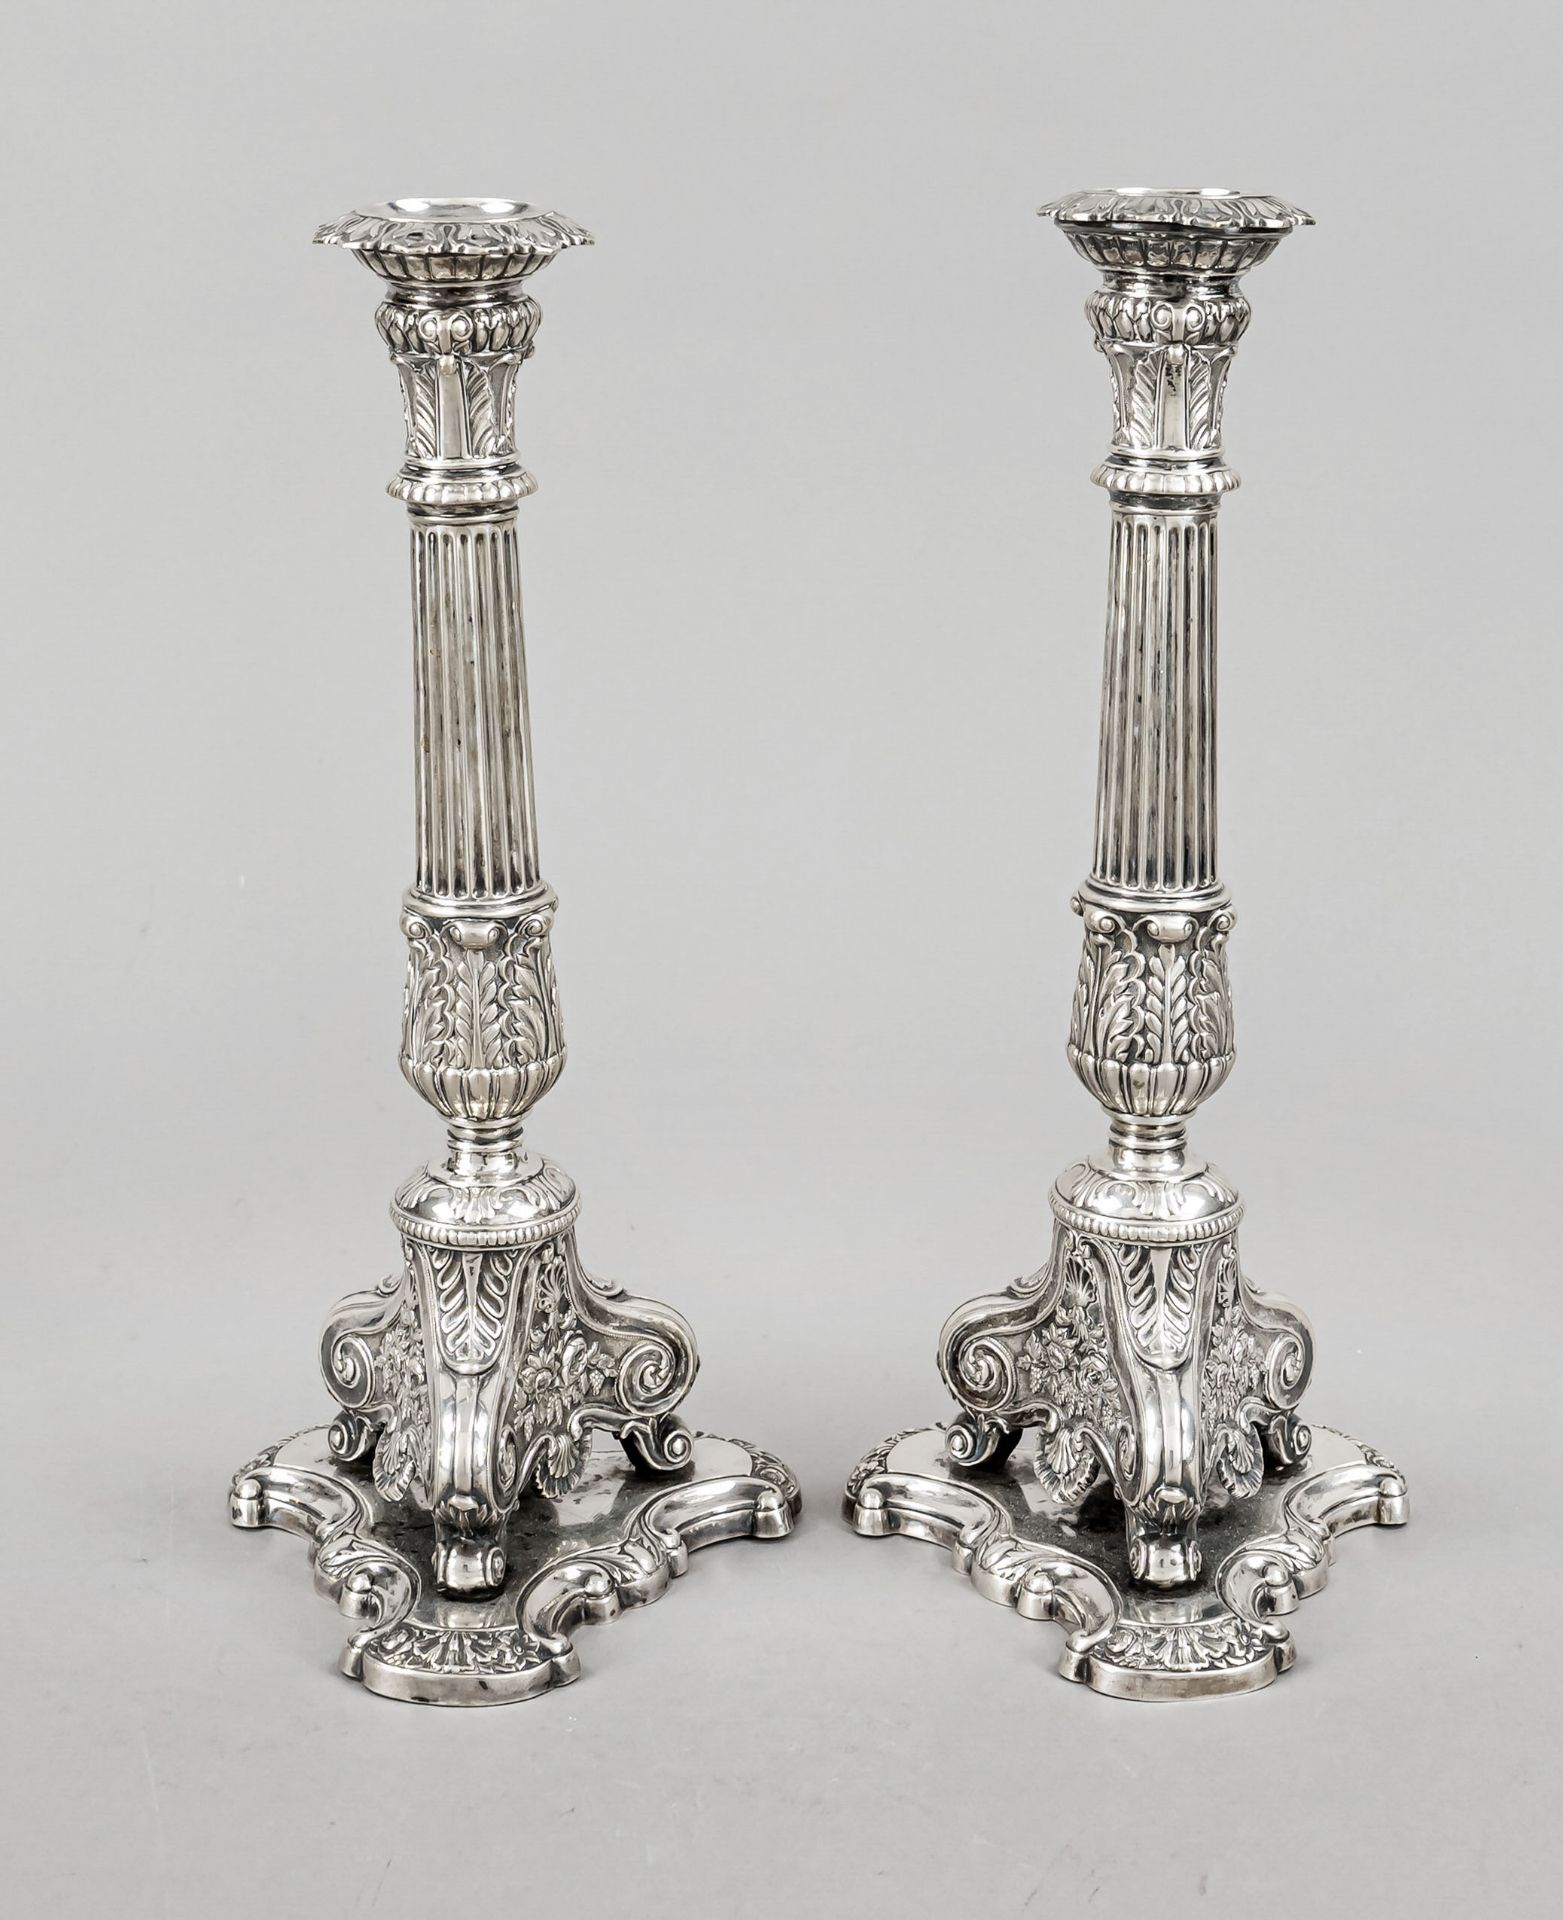 Pair of candlesticks, 2nd half of 19th century, silver 13 soldered (812,5/000), 3-sided stand on